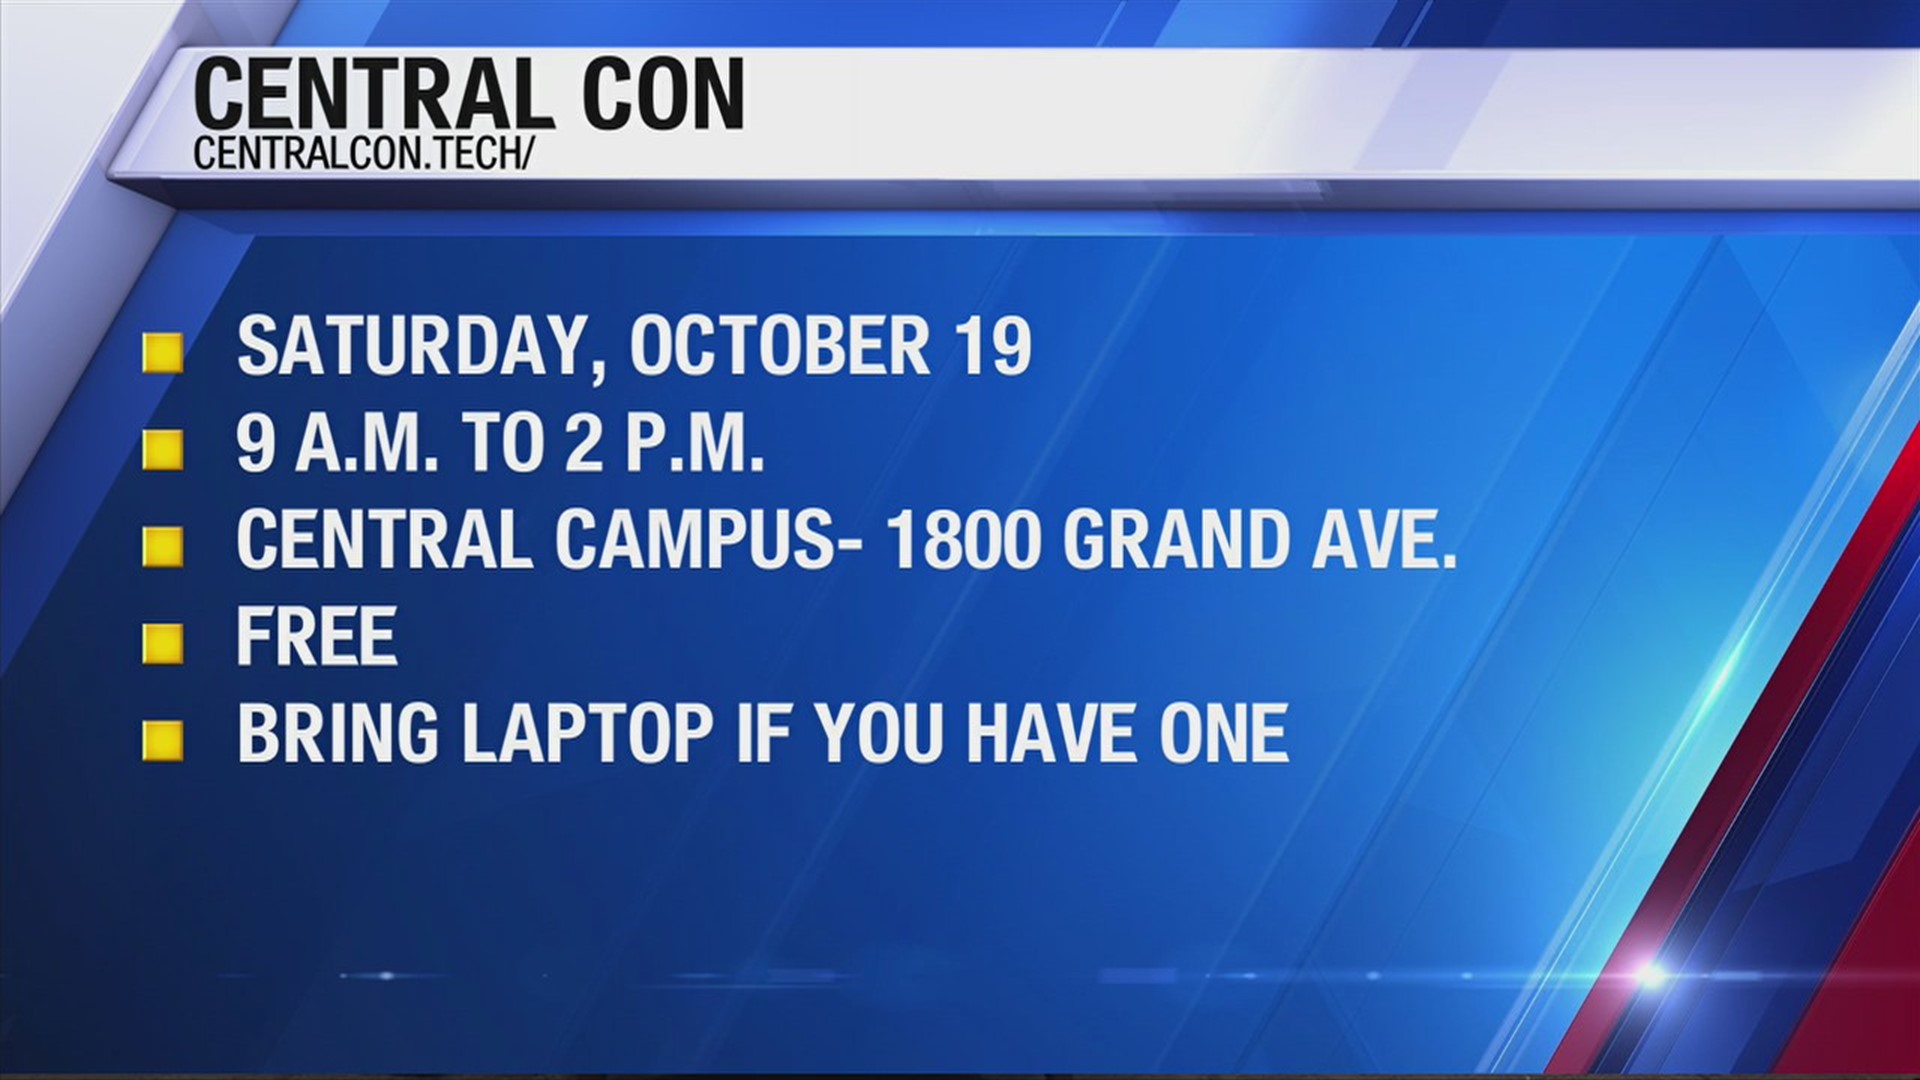 This Saturday, middle school and high school students can learn how the internet works and how it's through cybersecurity at Central Con.